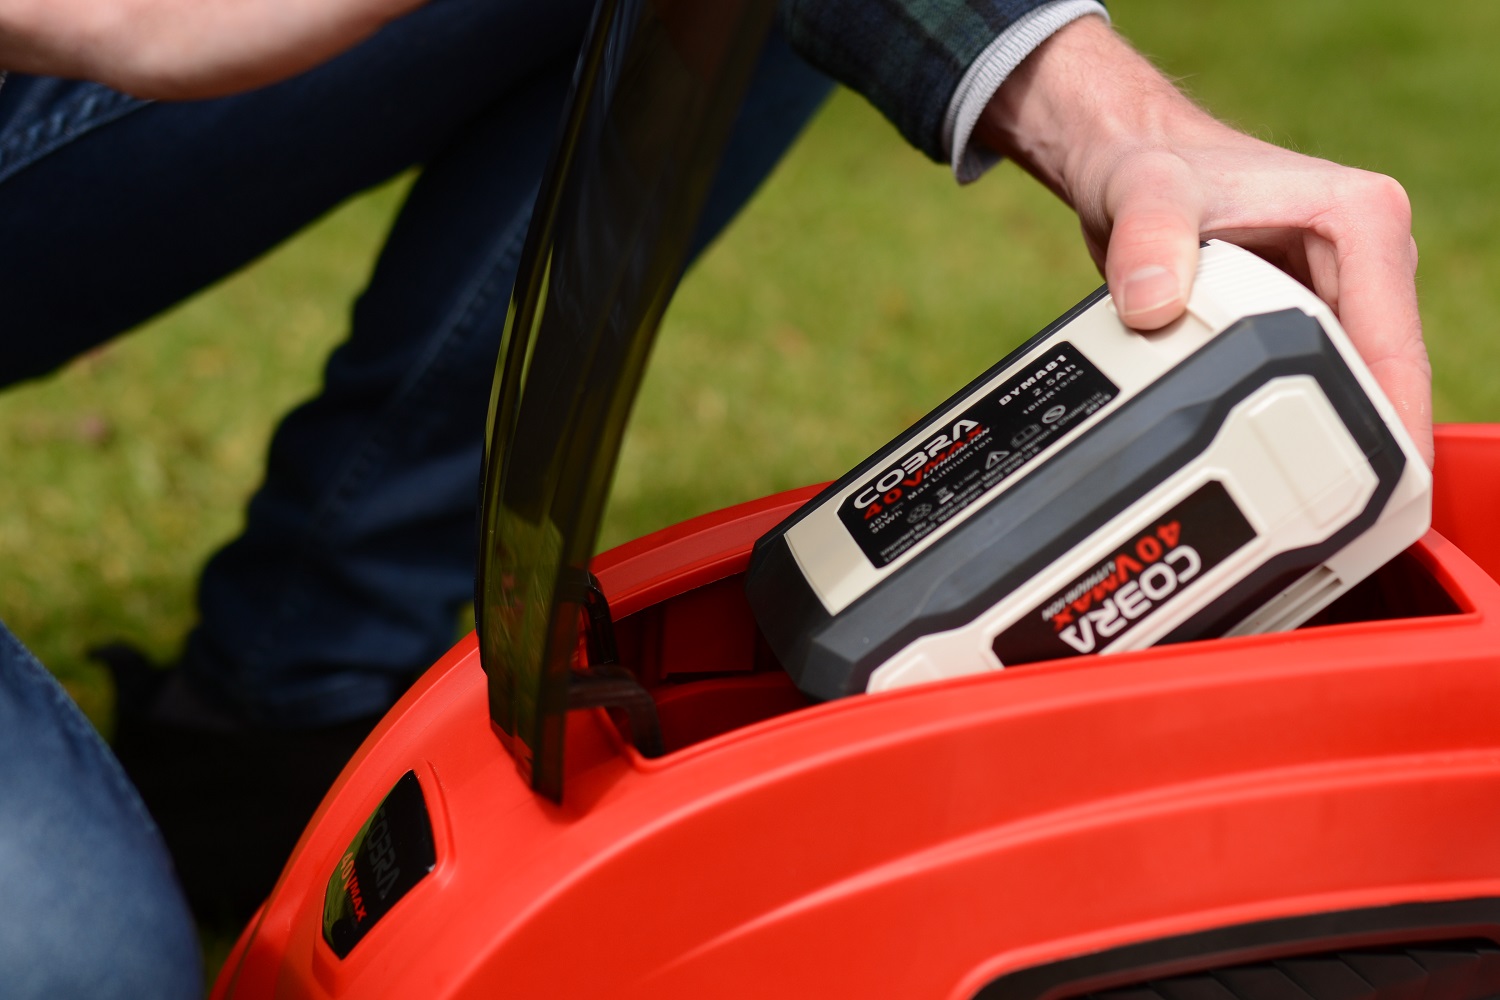 A man putting a battery pack into a red lawn mower